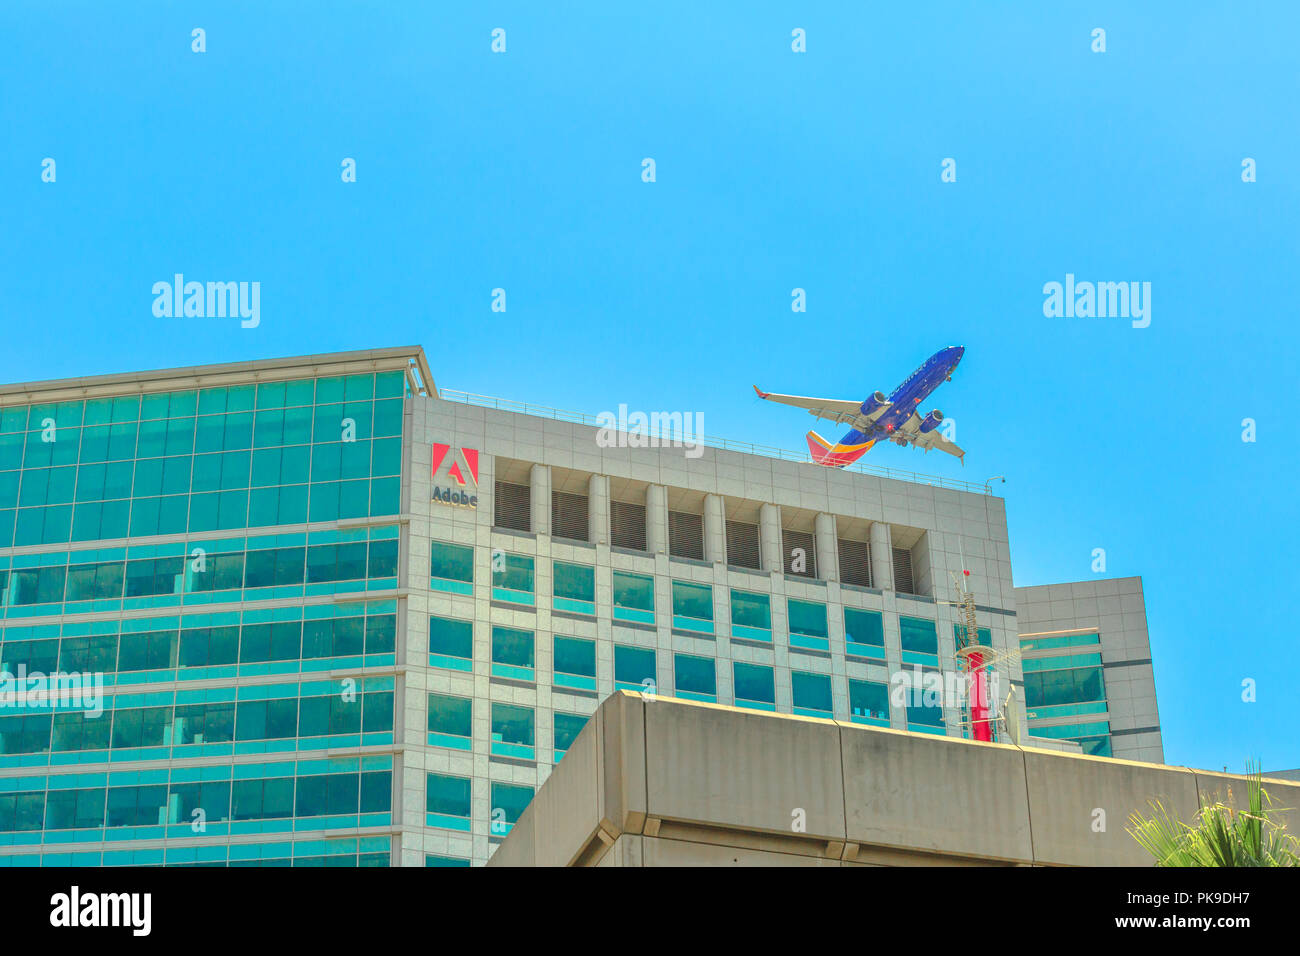 San Jose, CA, United States - August 12, 2018: Adobe headquarters skyscraper in Silicon Valley, with an airplane flying above from the close international airport Norman Y. Mineta of San Jose. Stock Photo